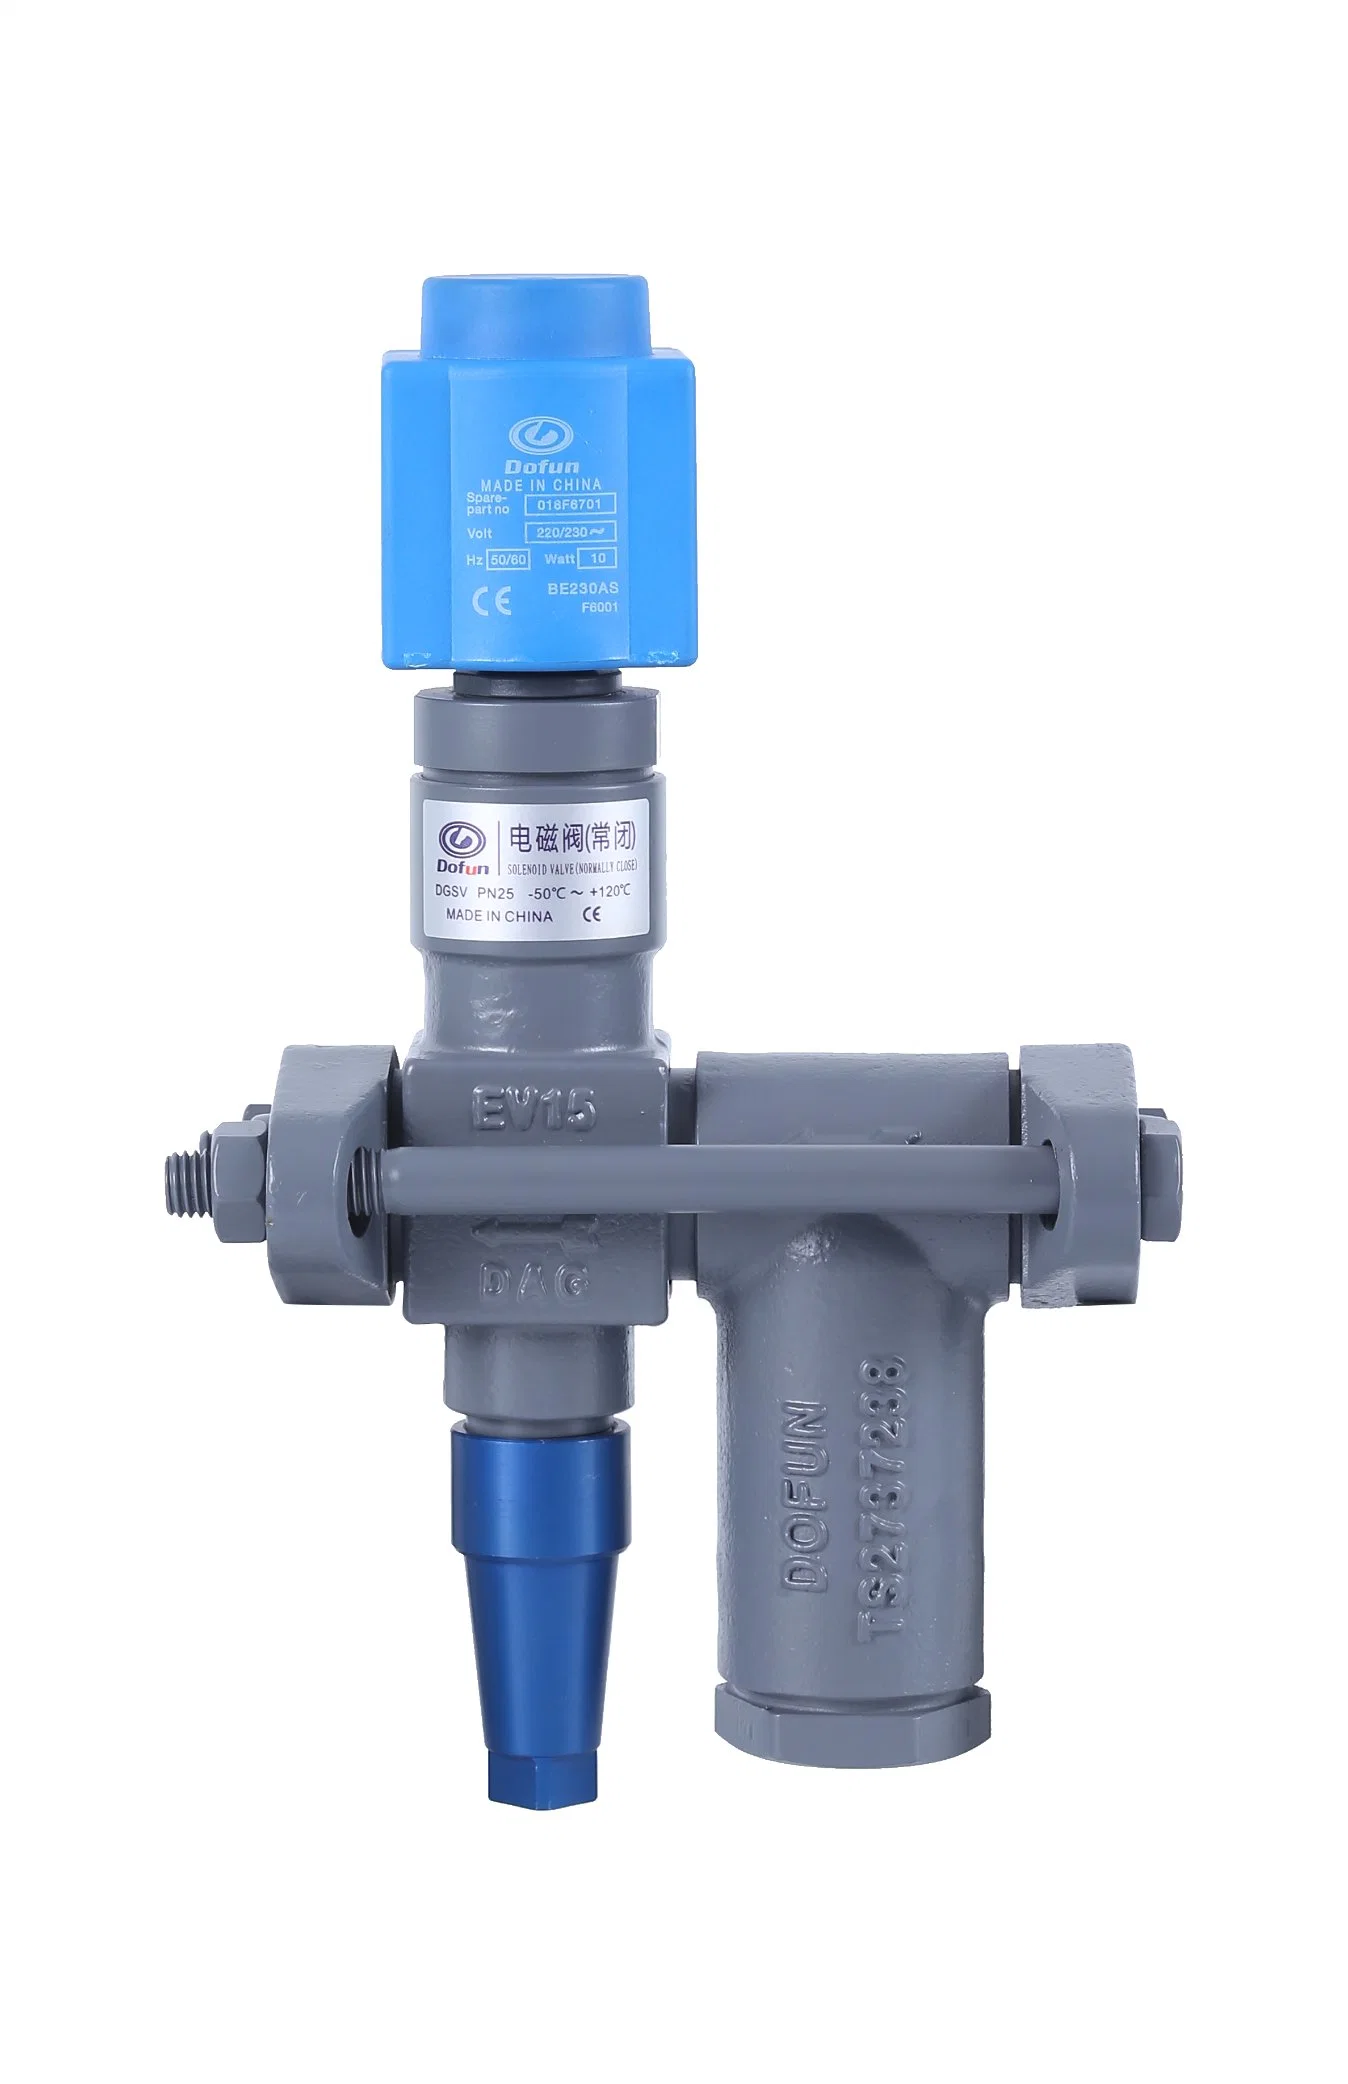 Refrigeration Solenoid Valve Is Used for Remote Control of The Globe Valve, The Regulating Organ of The Two-Position Regulating System